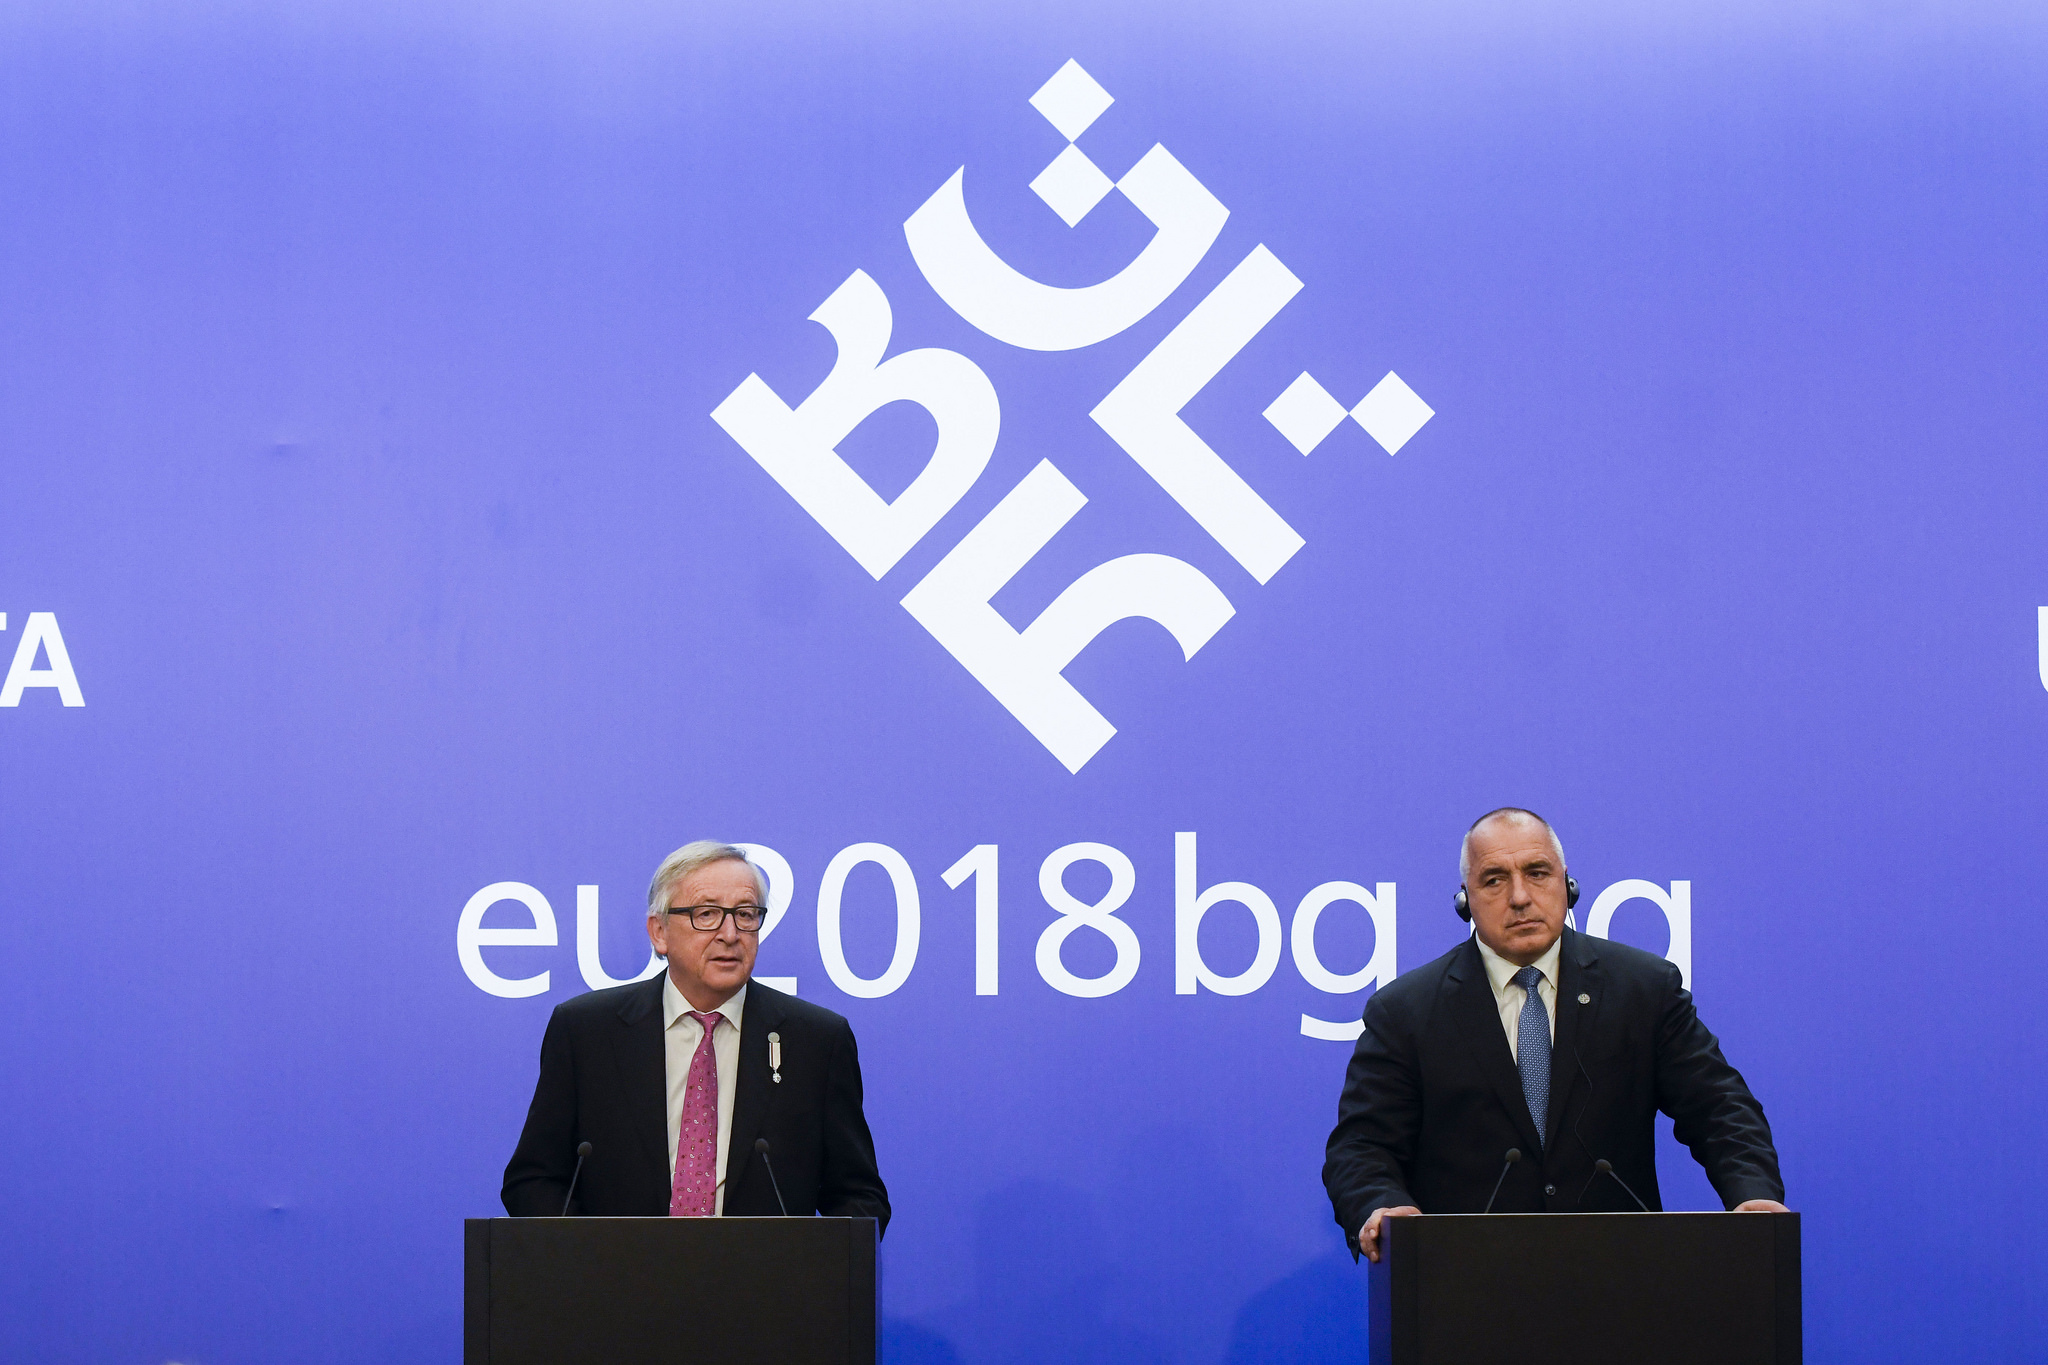 Boyko Borissov, Bulgarian Prime Minister and Jean-Claude Juncker, President of the European Commission at the press conference in Sofia